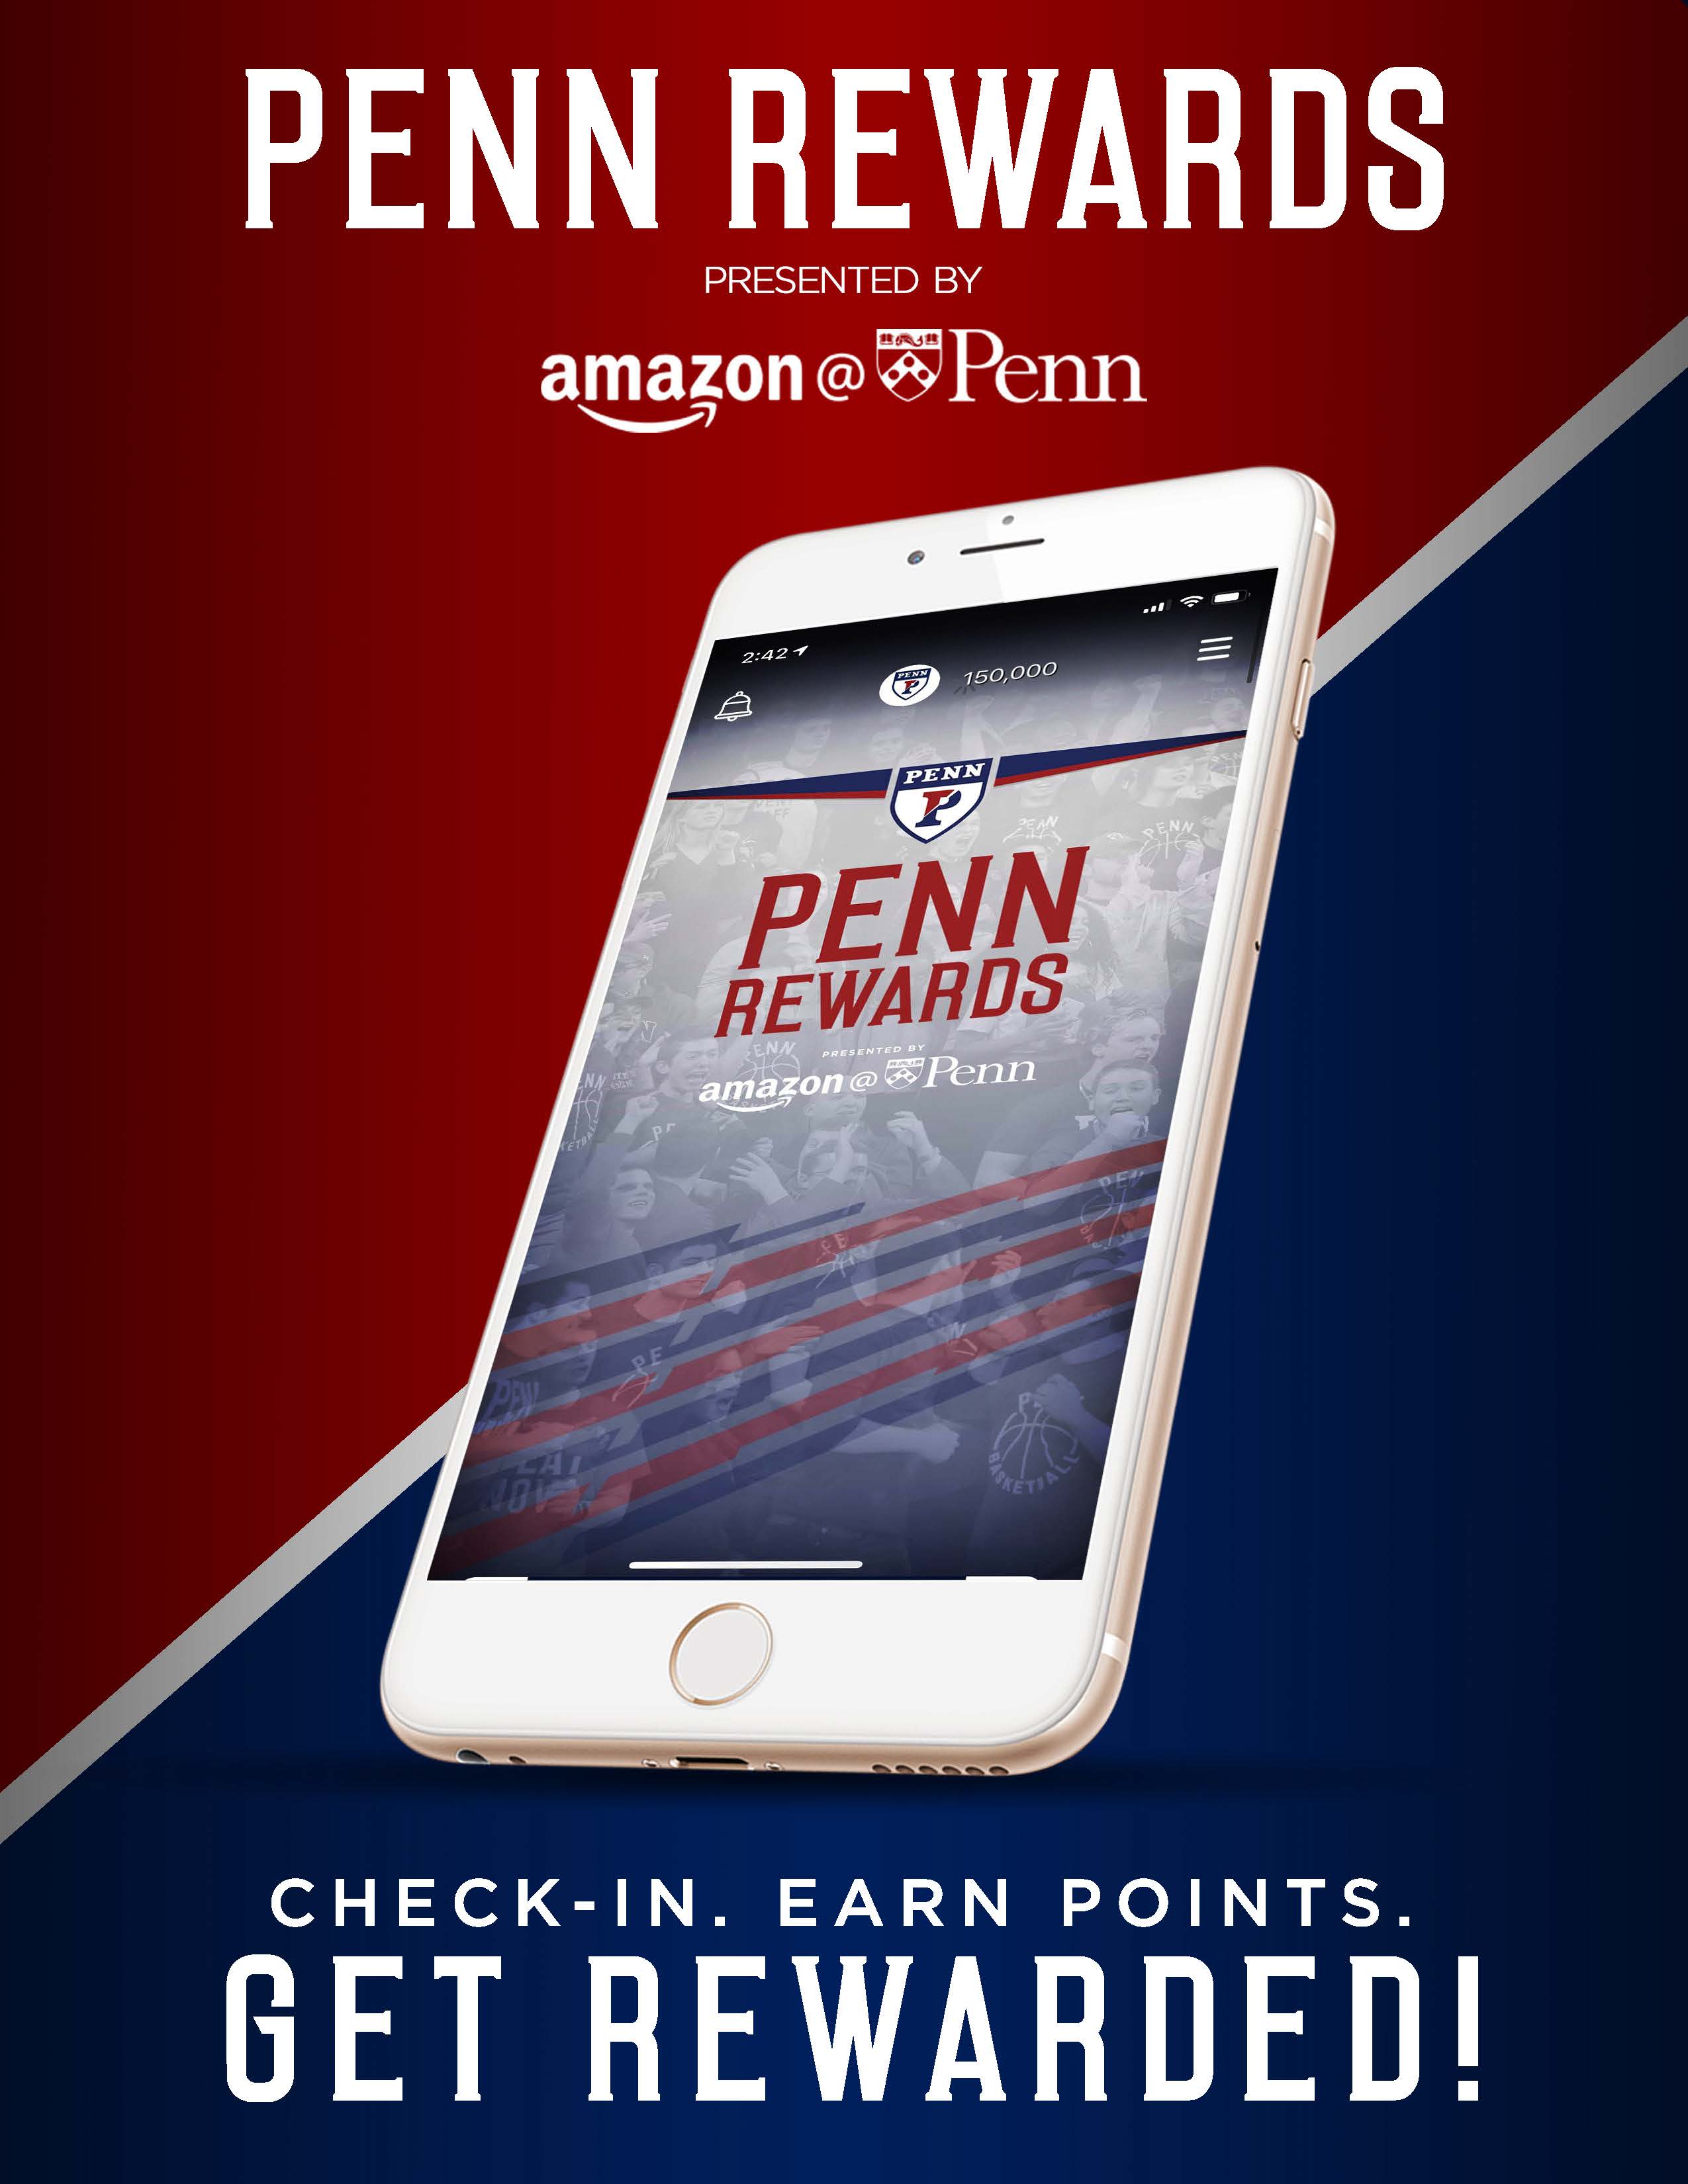 Cellphone with Penn Rewards app on blue and red background